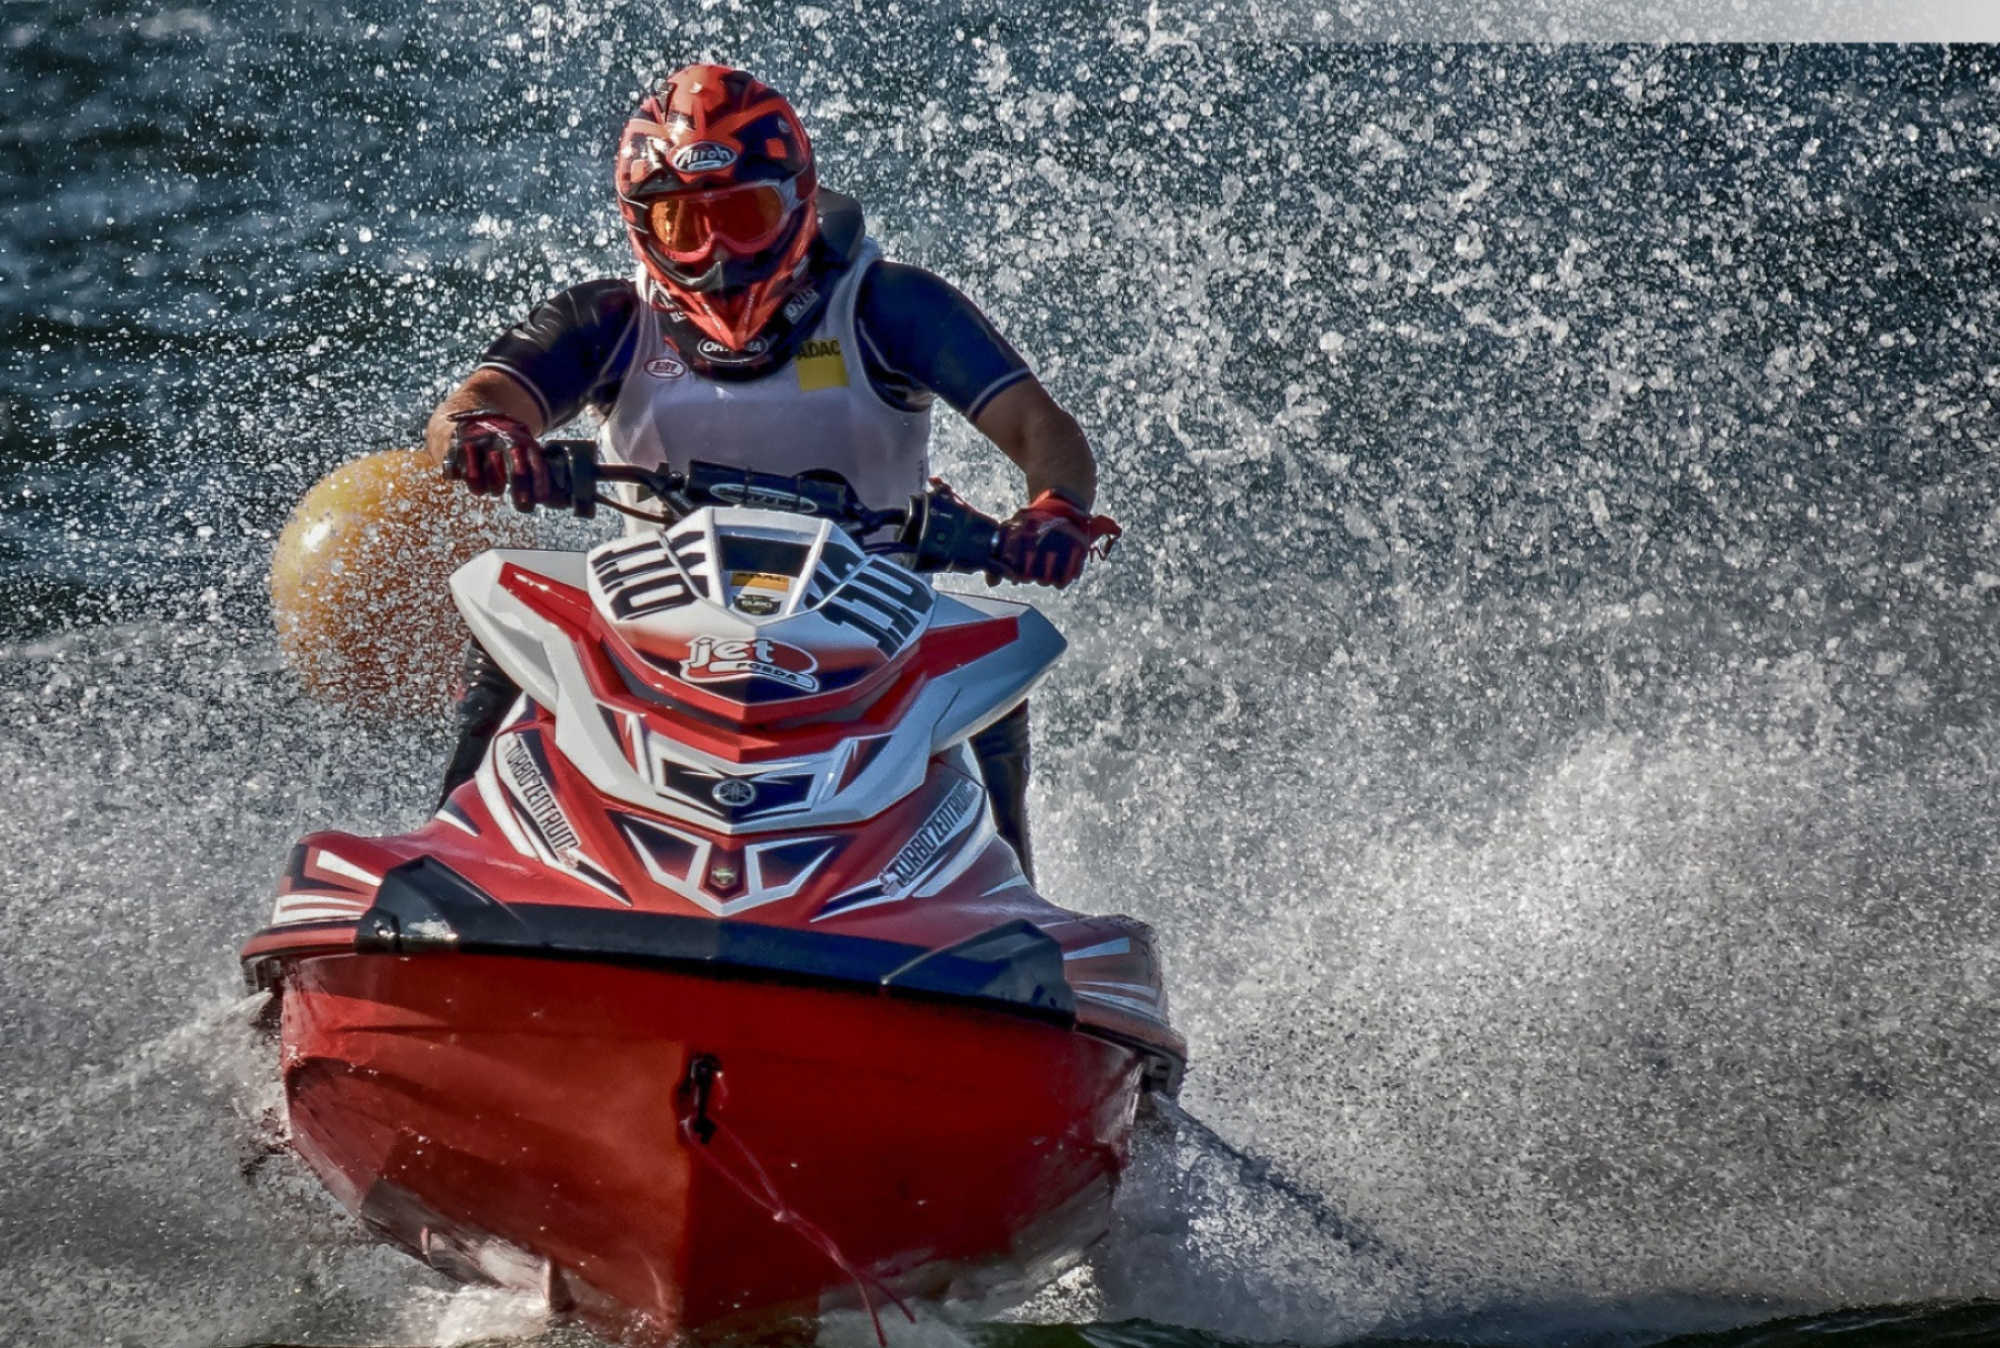 Rent a jet ski, Whitehaven UK, Ultimate water fun, Perfect holiday activity, 2000x1350 HD Desktop